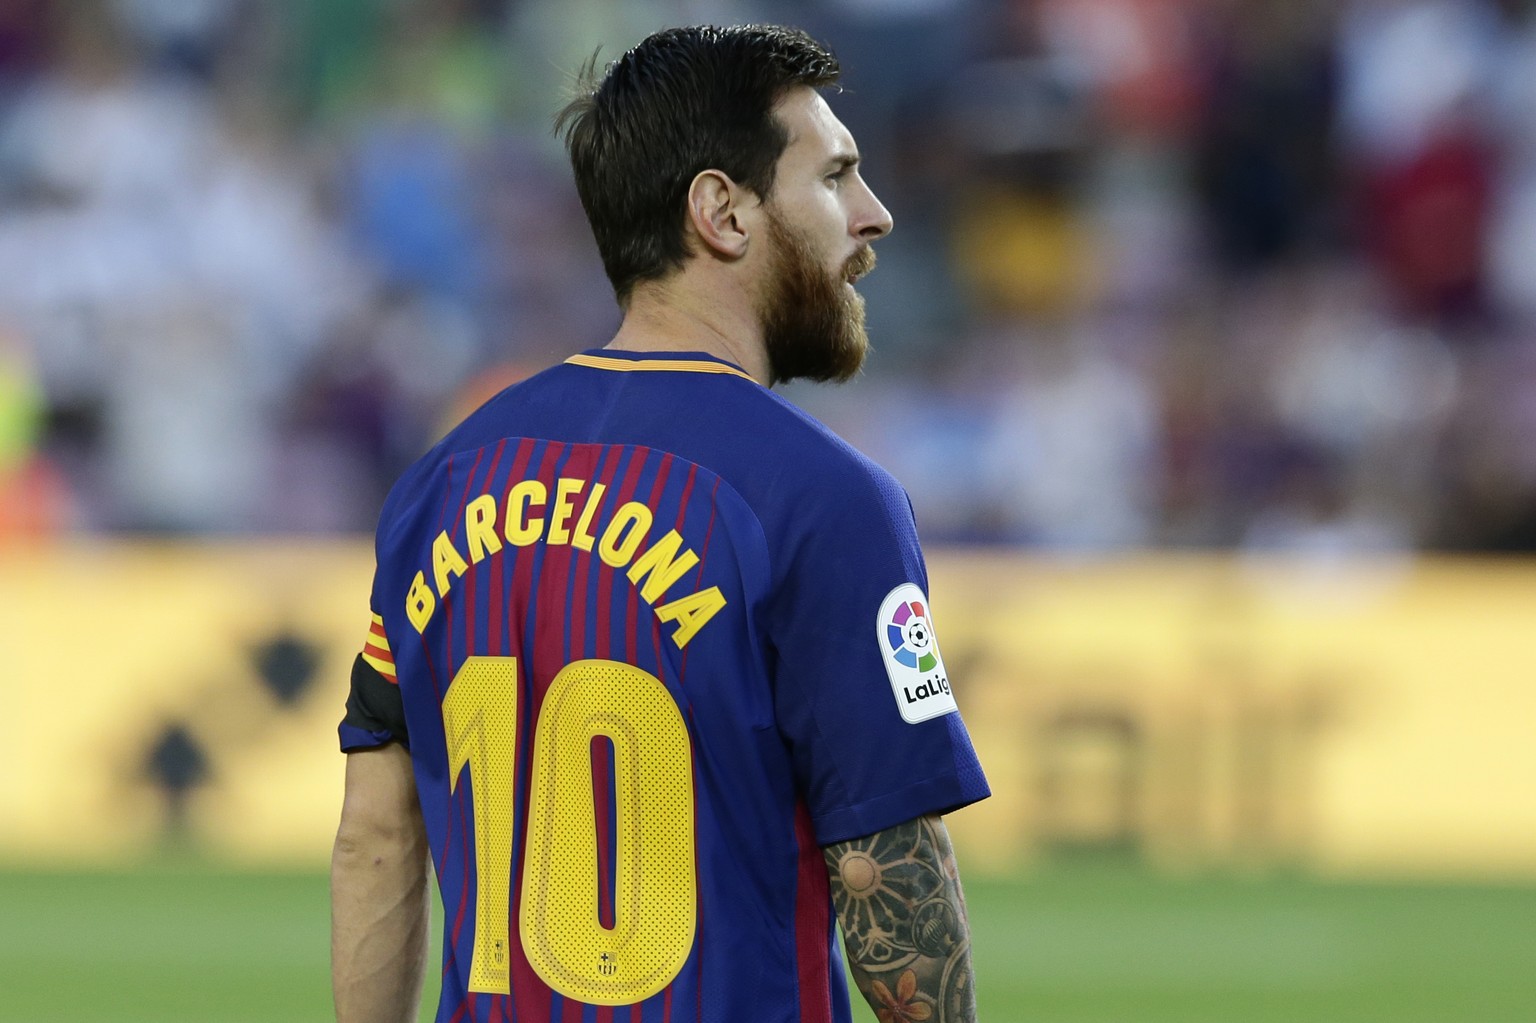 Barcelona&#039;s Lionel Messi wears a shirt with &#039;Barcelona&#039; on his back instead of his name as did all Barcelona players to pay homage to the van attack victims before a La Liga soccer matc ...